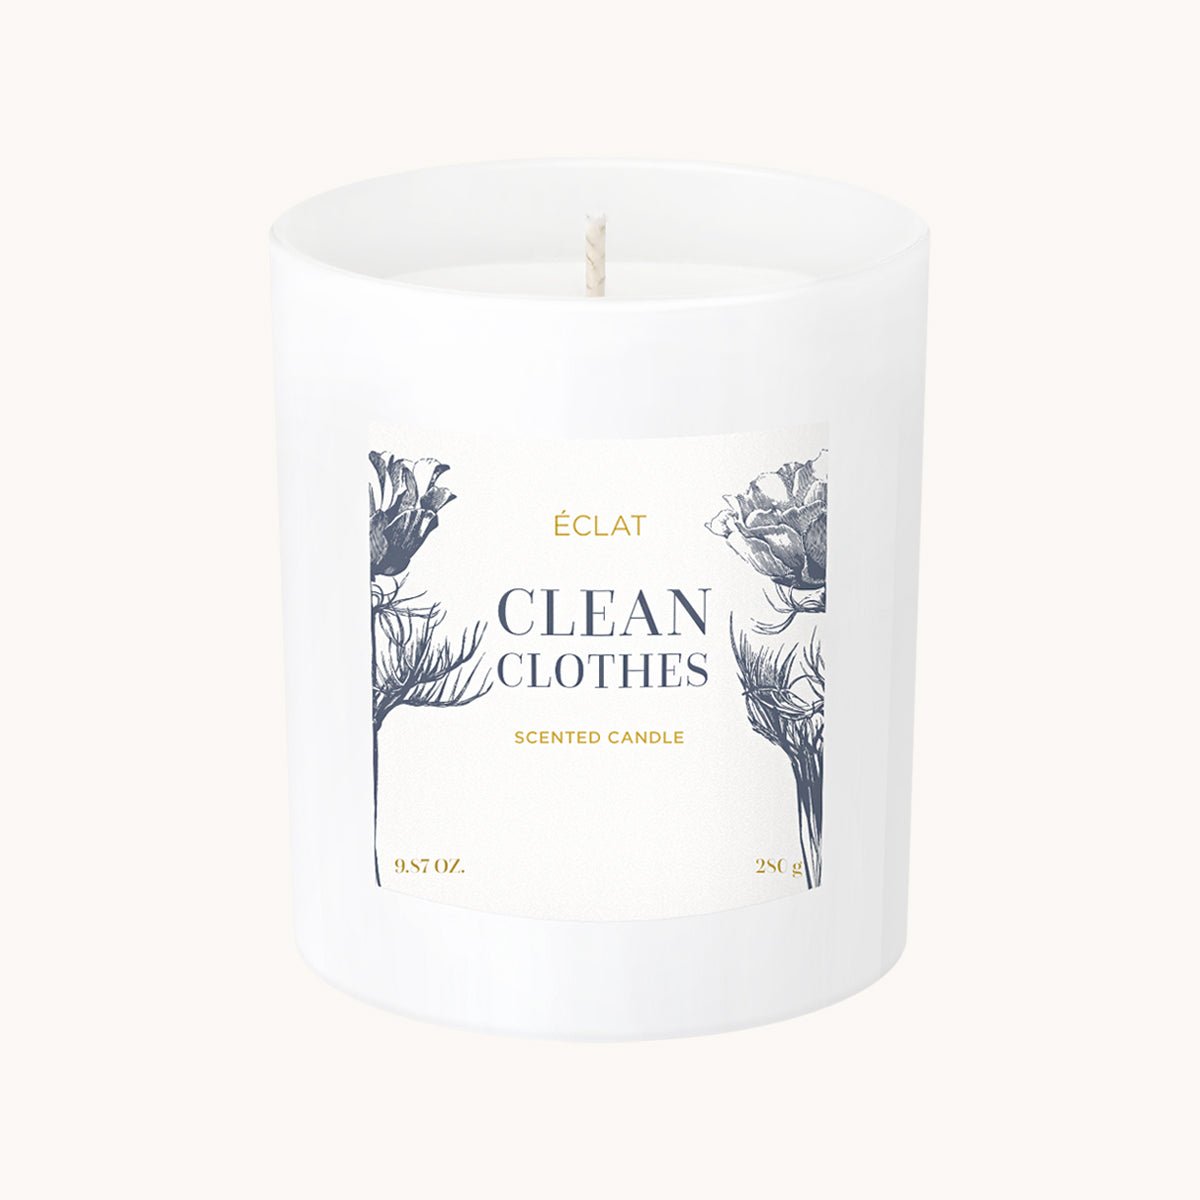 ÉCLAT Clean Clothes Soy Wax Scented Candle